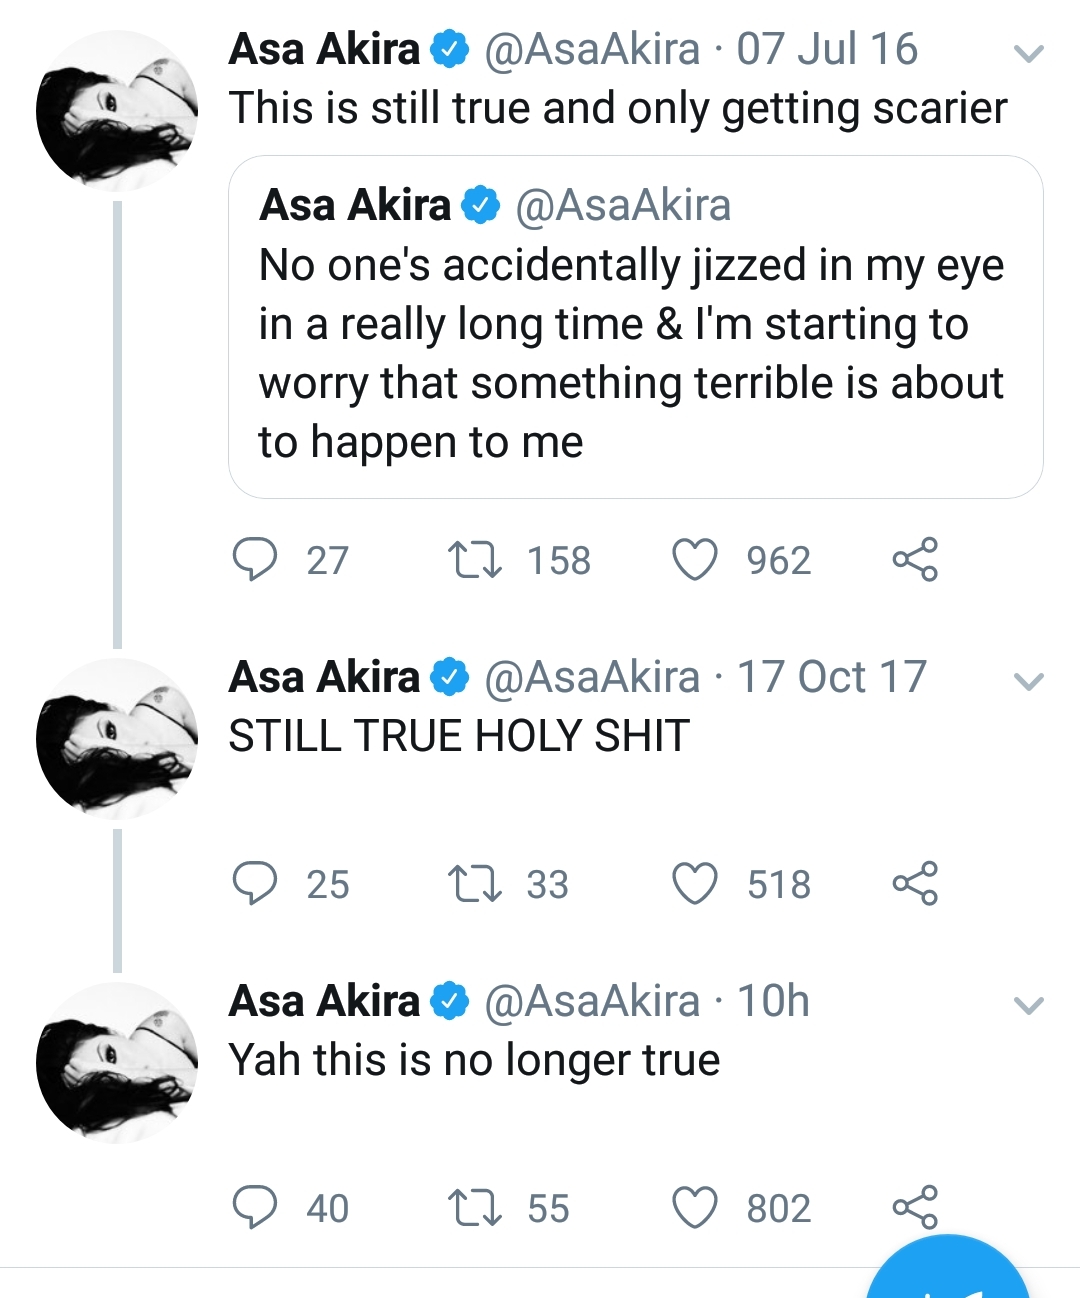 angle - Asa Akira Akira 07 Jul 16 v This is still true and only getting scarier Asa Akira Akira No one's accidentally jizzed in my eye in a really long time & I'm starting to worry that something terrible is about to happen to me 9 27 27 158 962 B Asa Aki